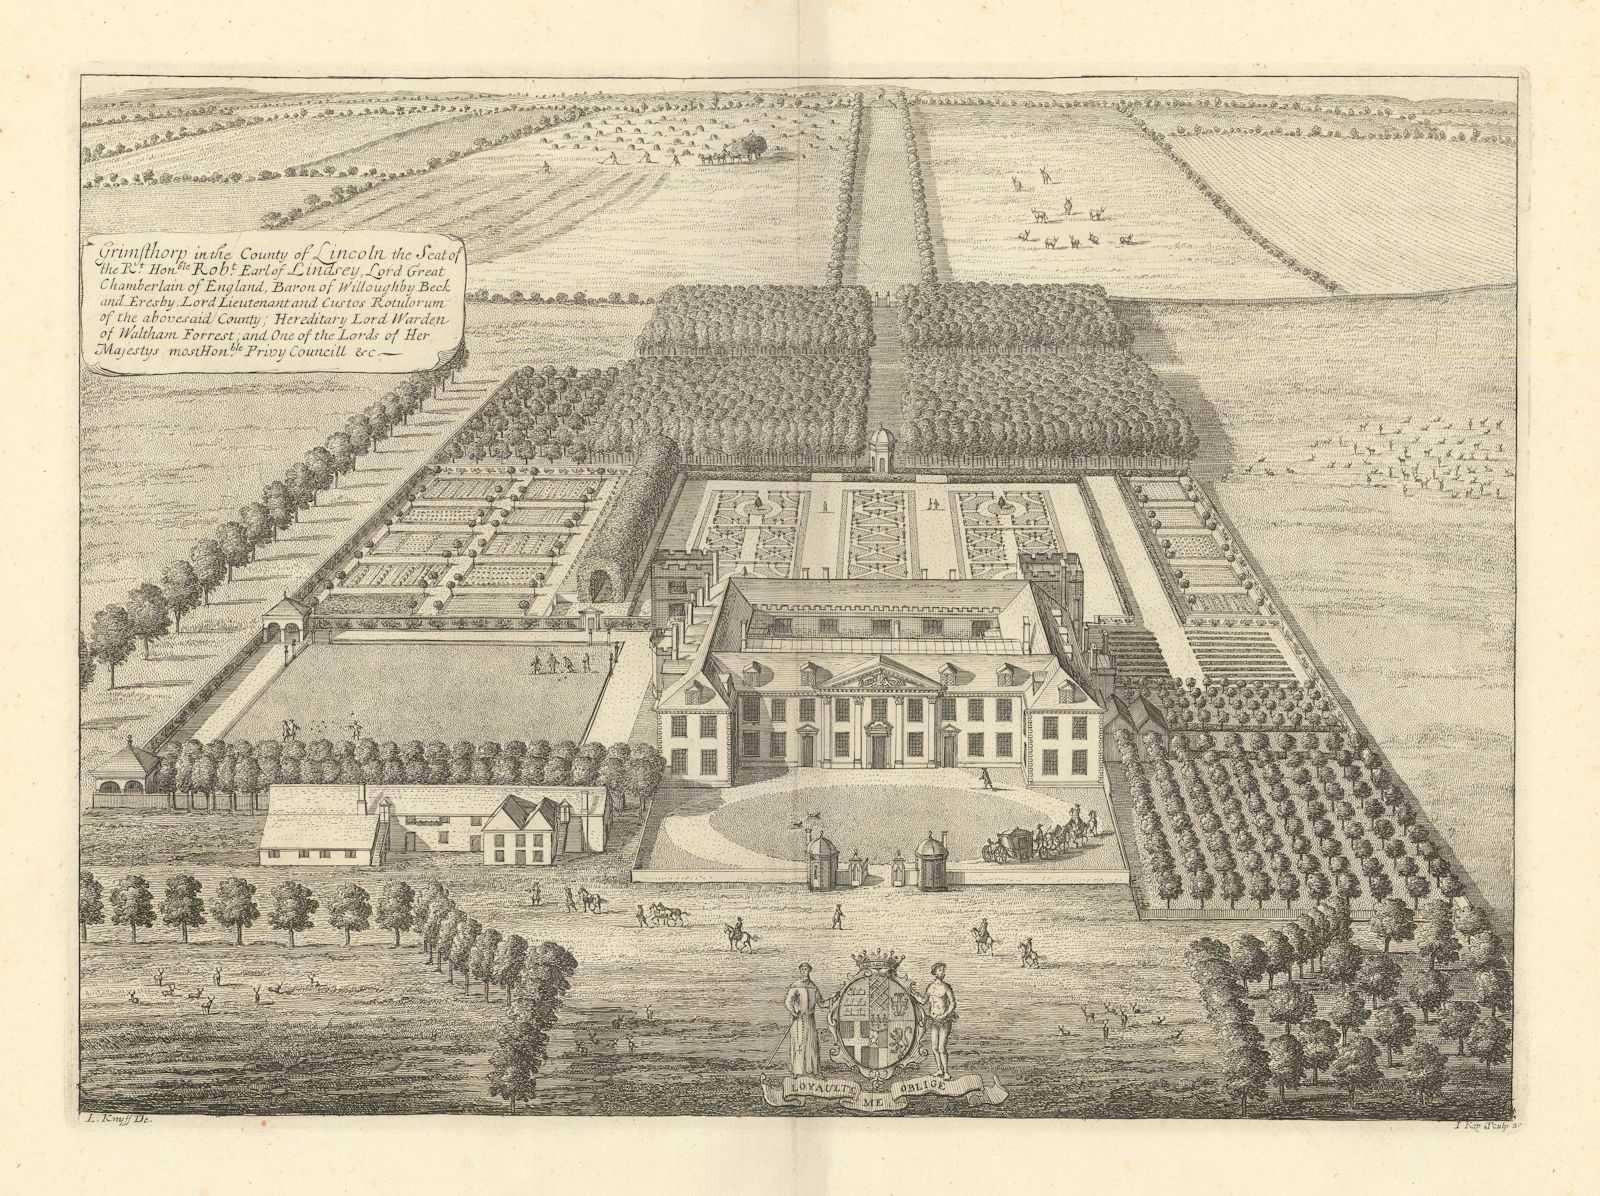 Grimsthorpe Castle by Kip/Knyff Pl.20 "Grimsthorp in the County of Lincoln" 1709